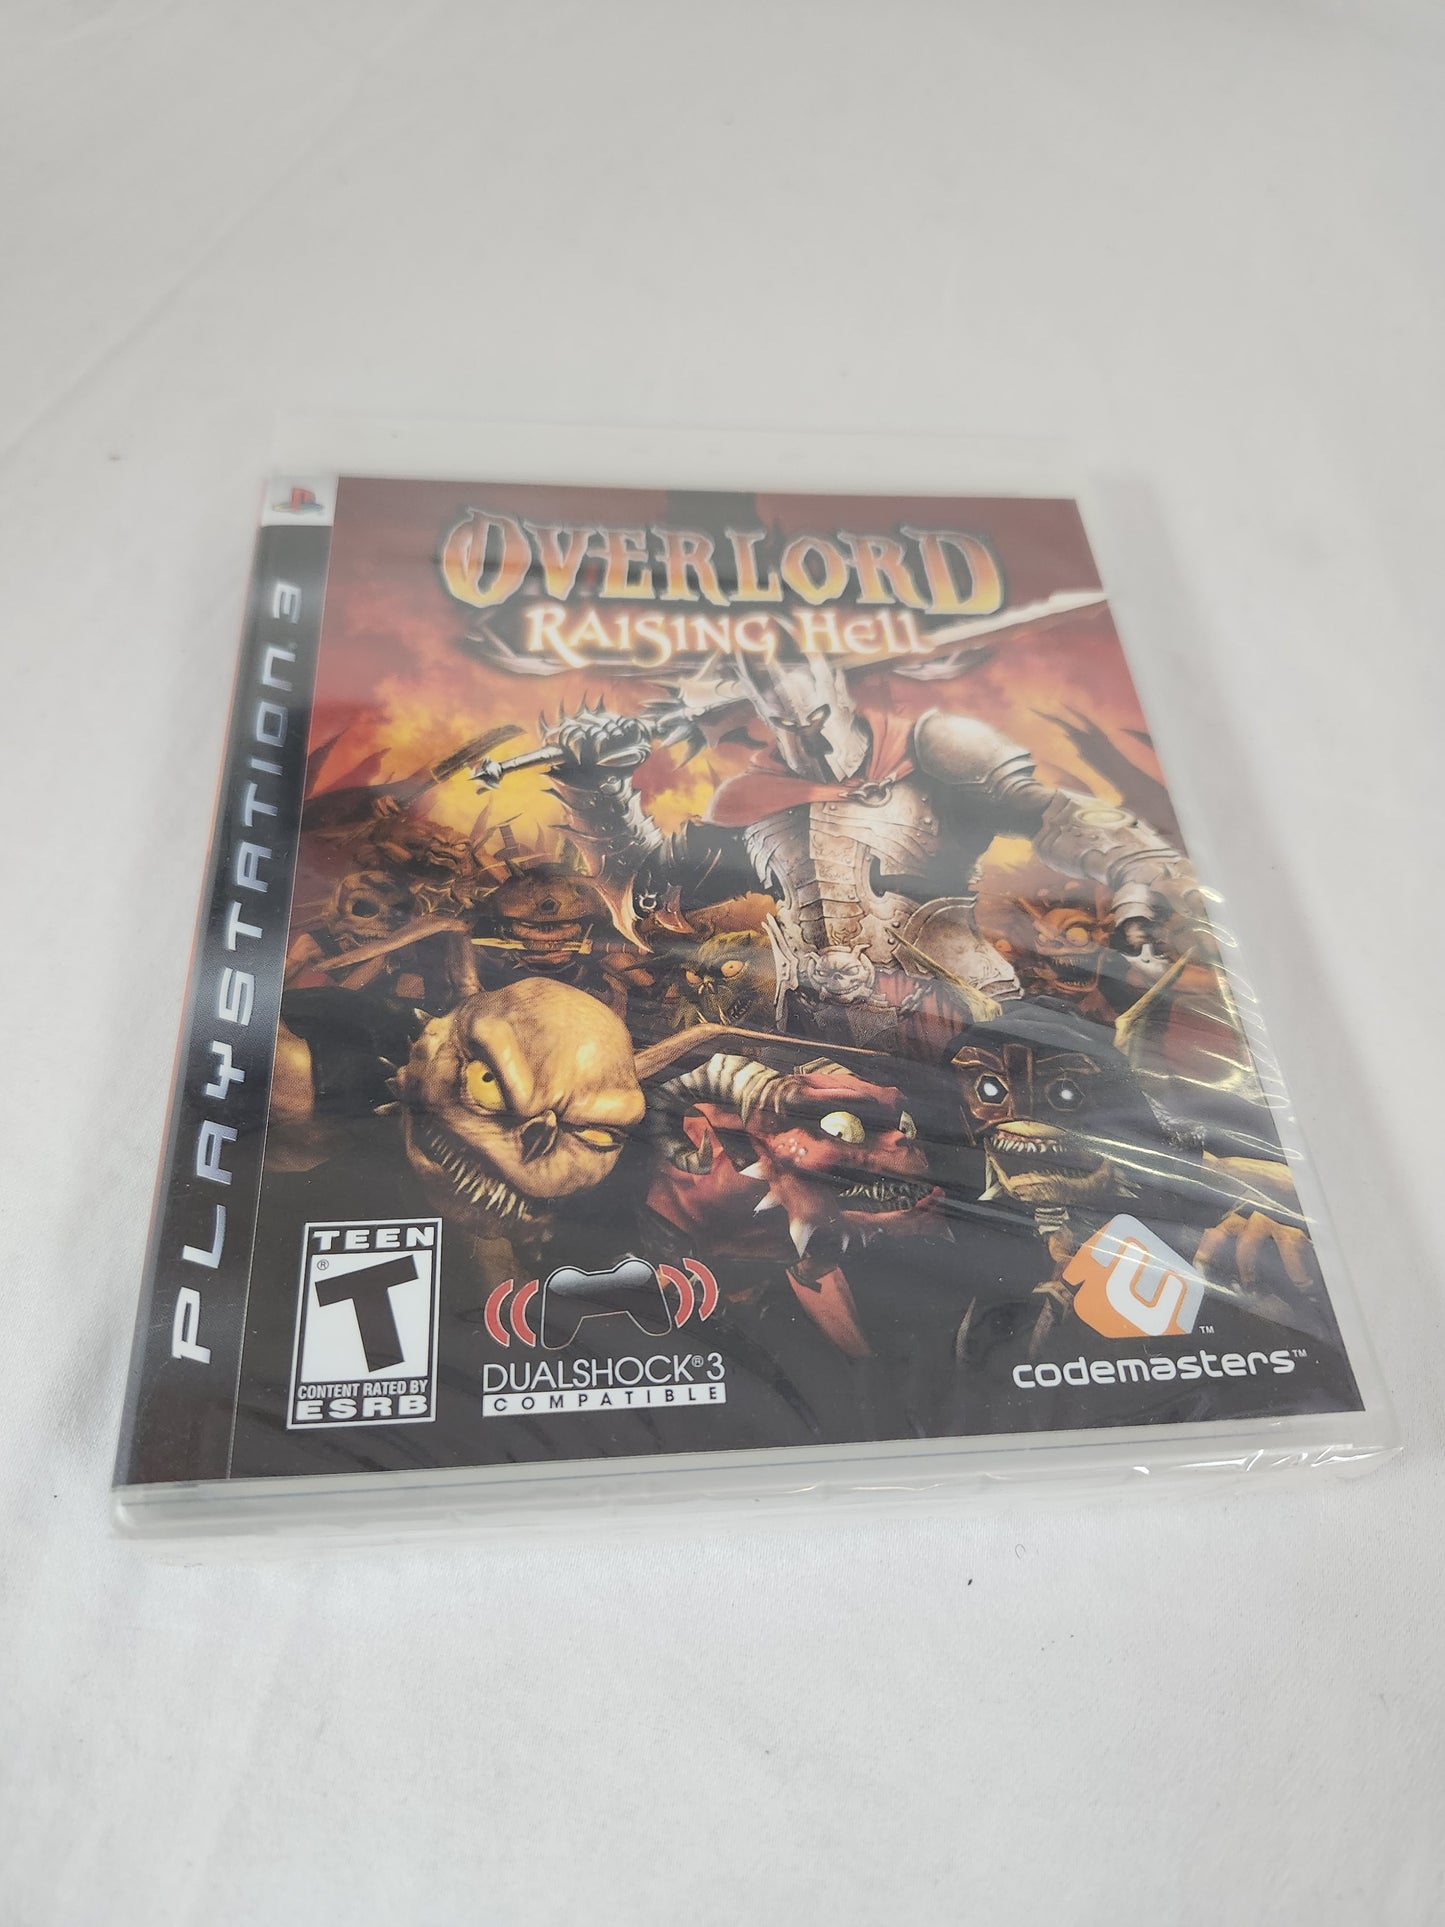 PlayStation 3 Overlord Raising Hell - Blue-Ray Disc